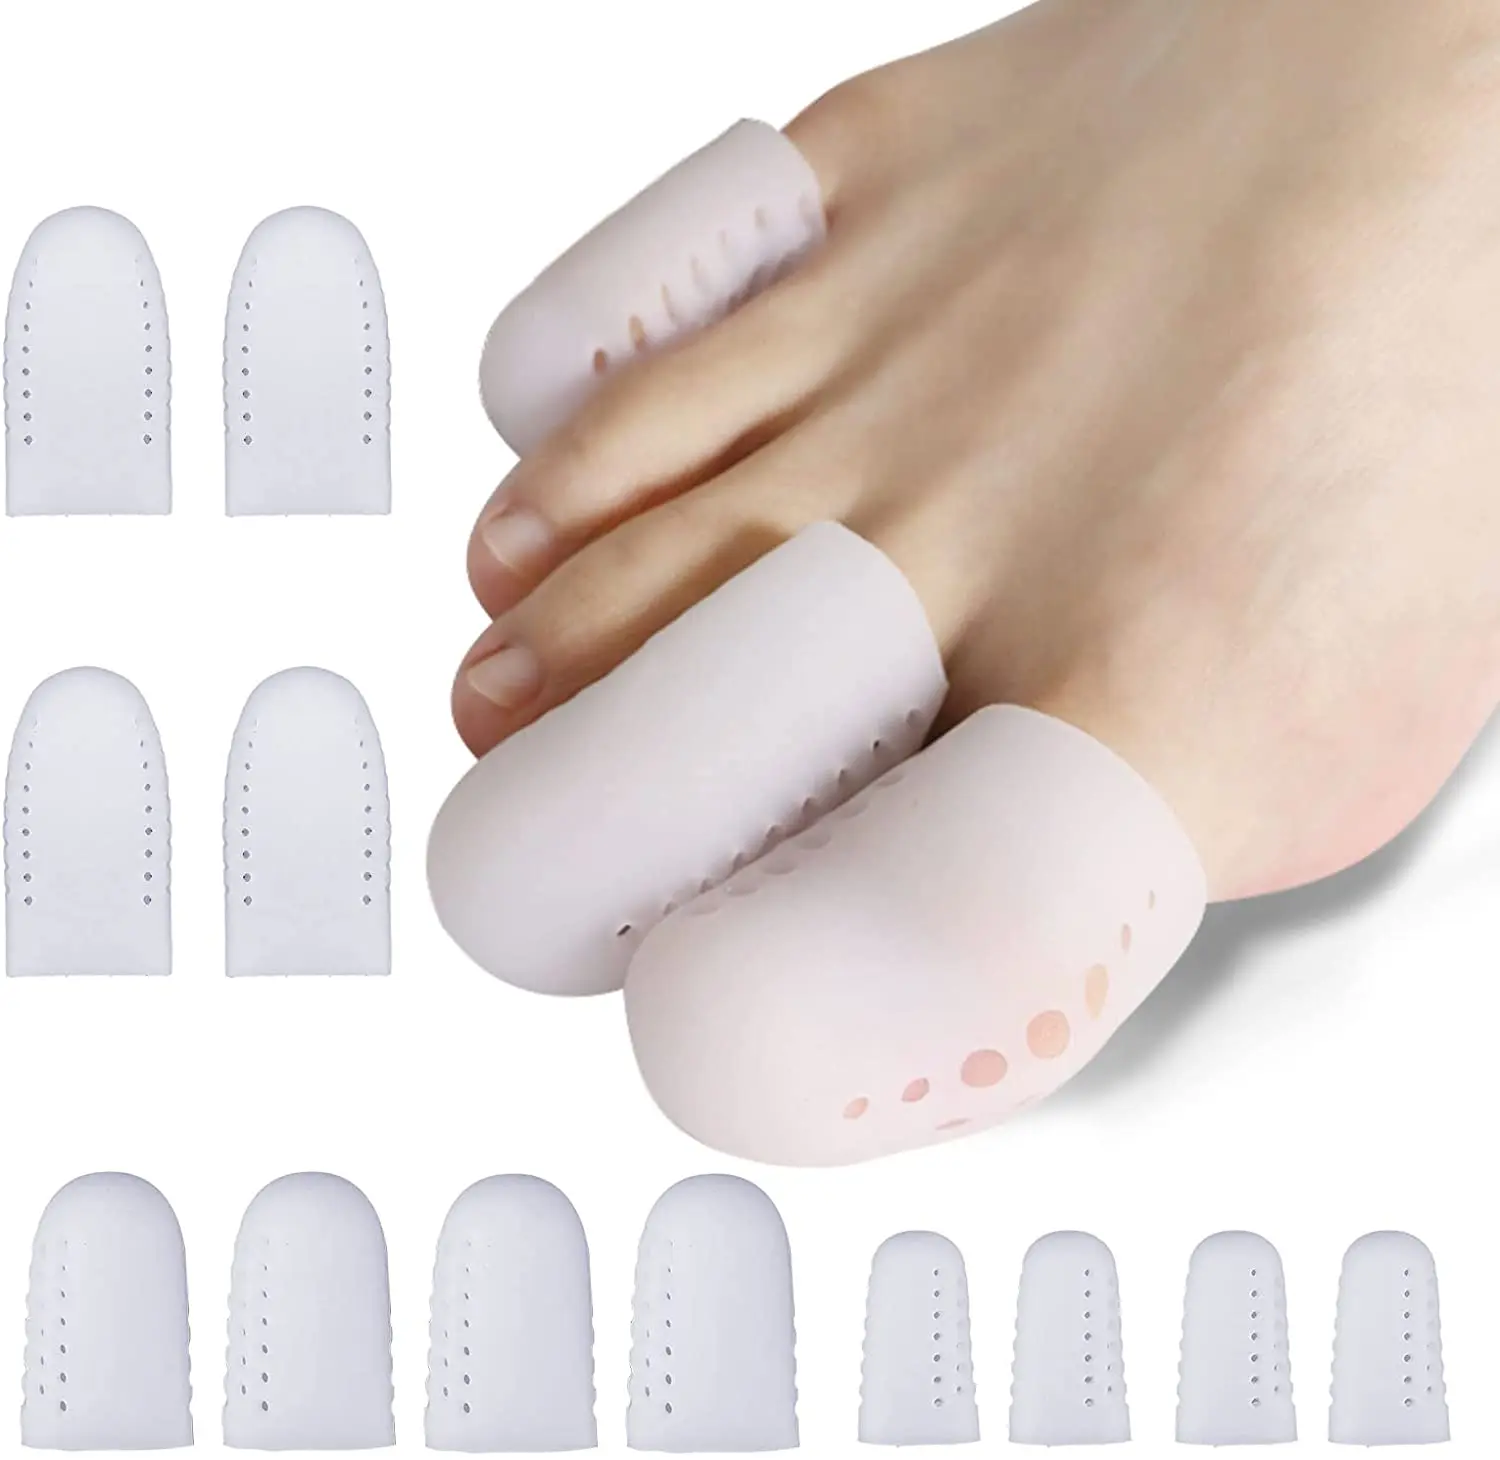 

2PCS Breathable Toe Protectors Sleeve Bunion Pads Cushion Big Toe Guards Silicone Toe Covers For Protection Of Ingrown Toenails